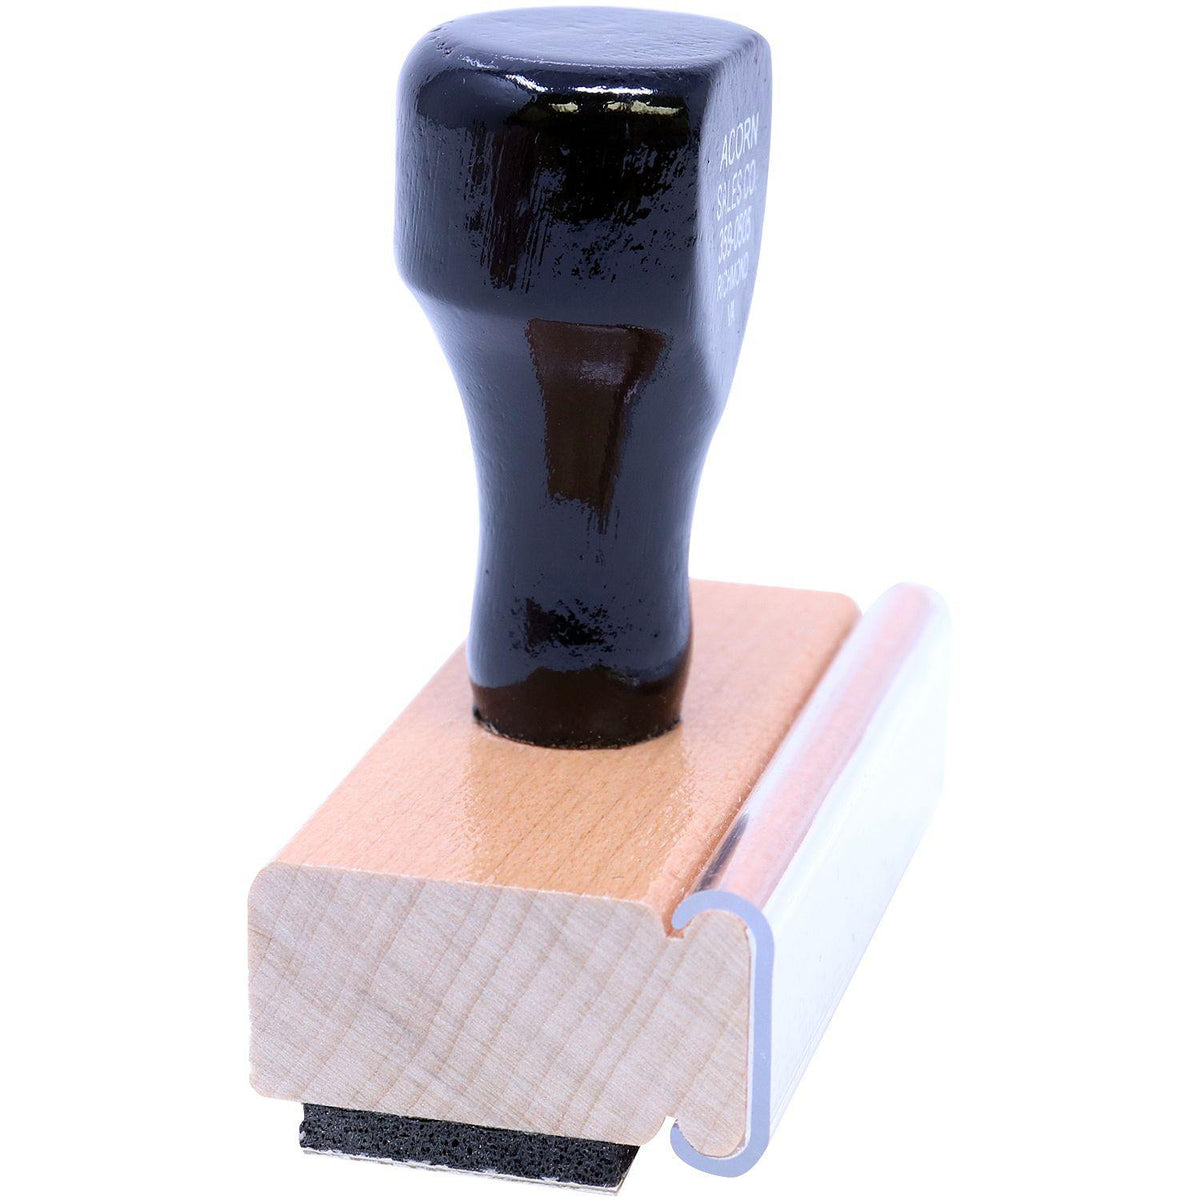 Side View of Large Dated Material Open Immediately Rubber Stamp at an Angle